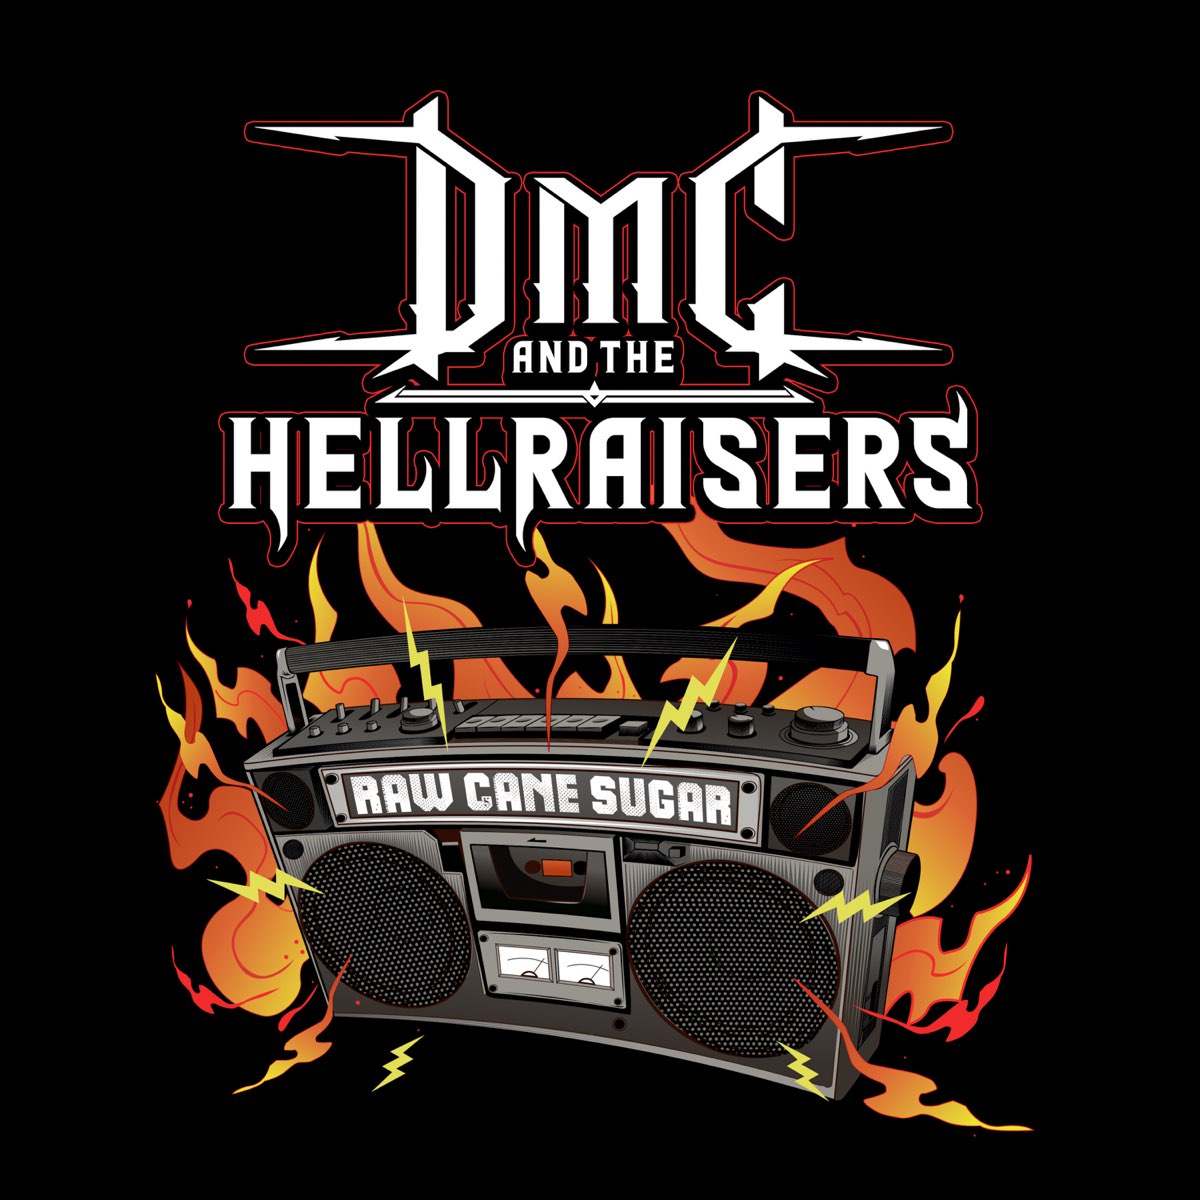 Raw Cane Sugar - EP by DMC and the Hellraisers on Apple Music